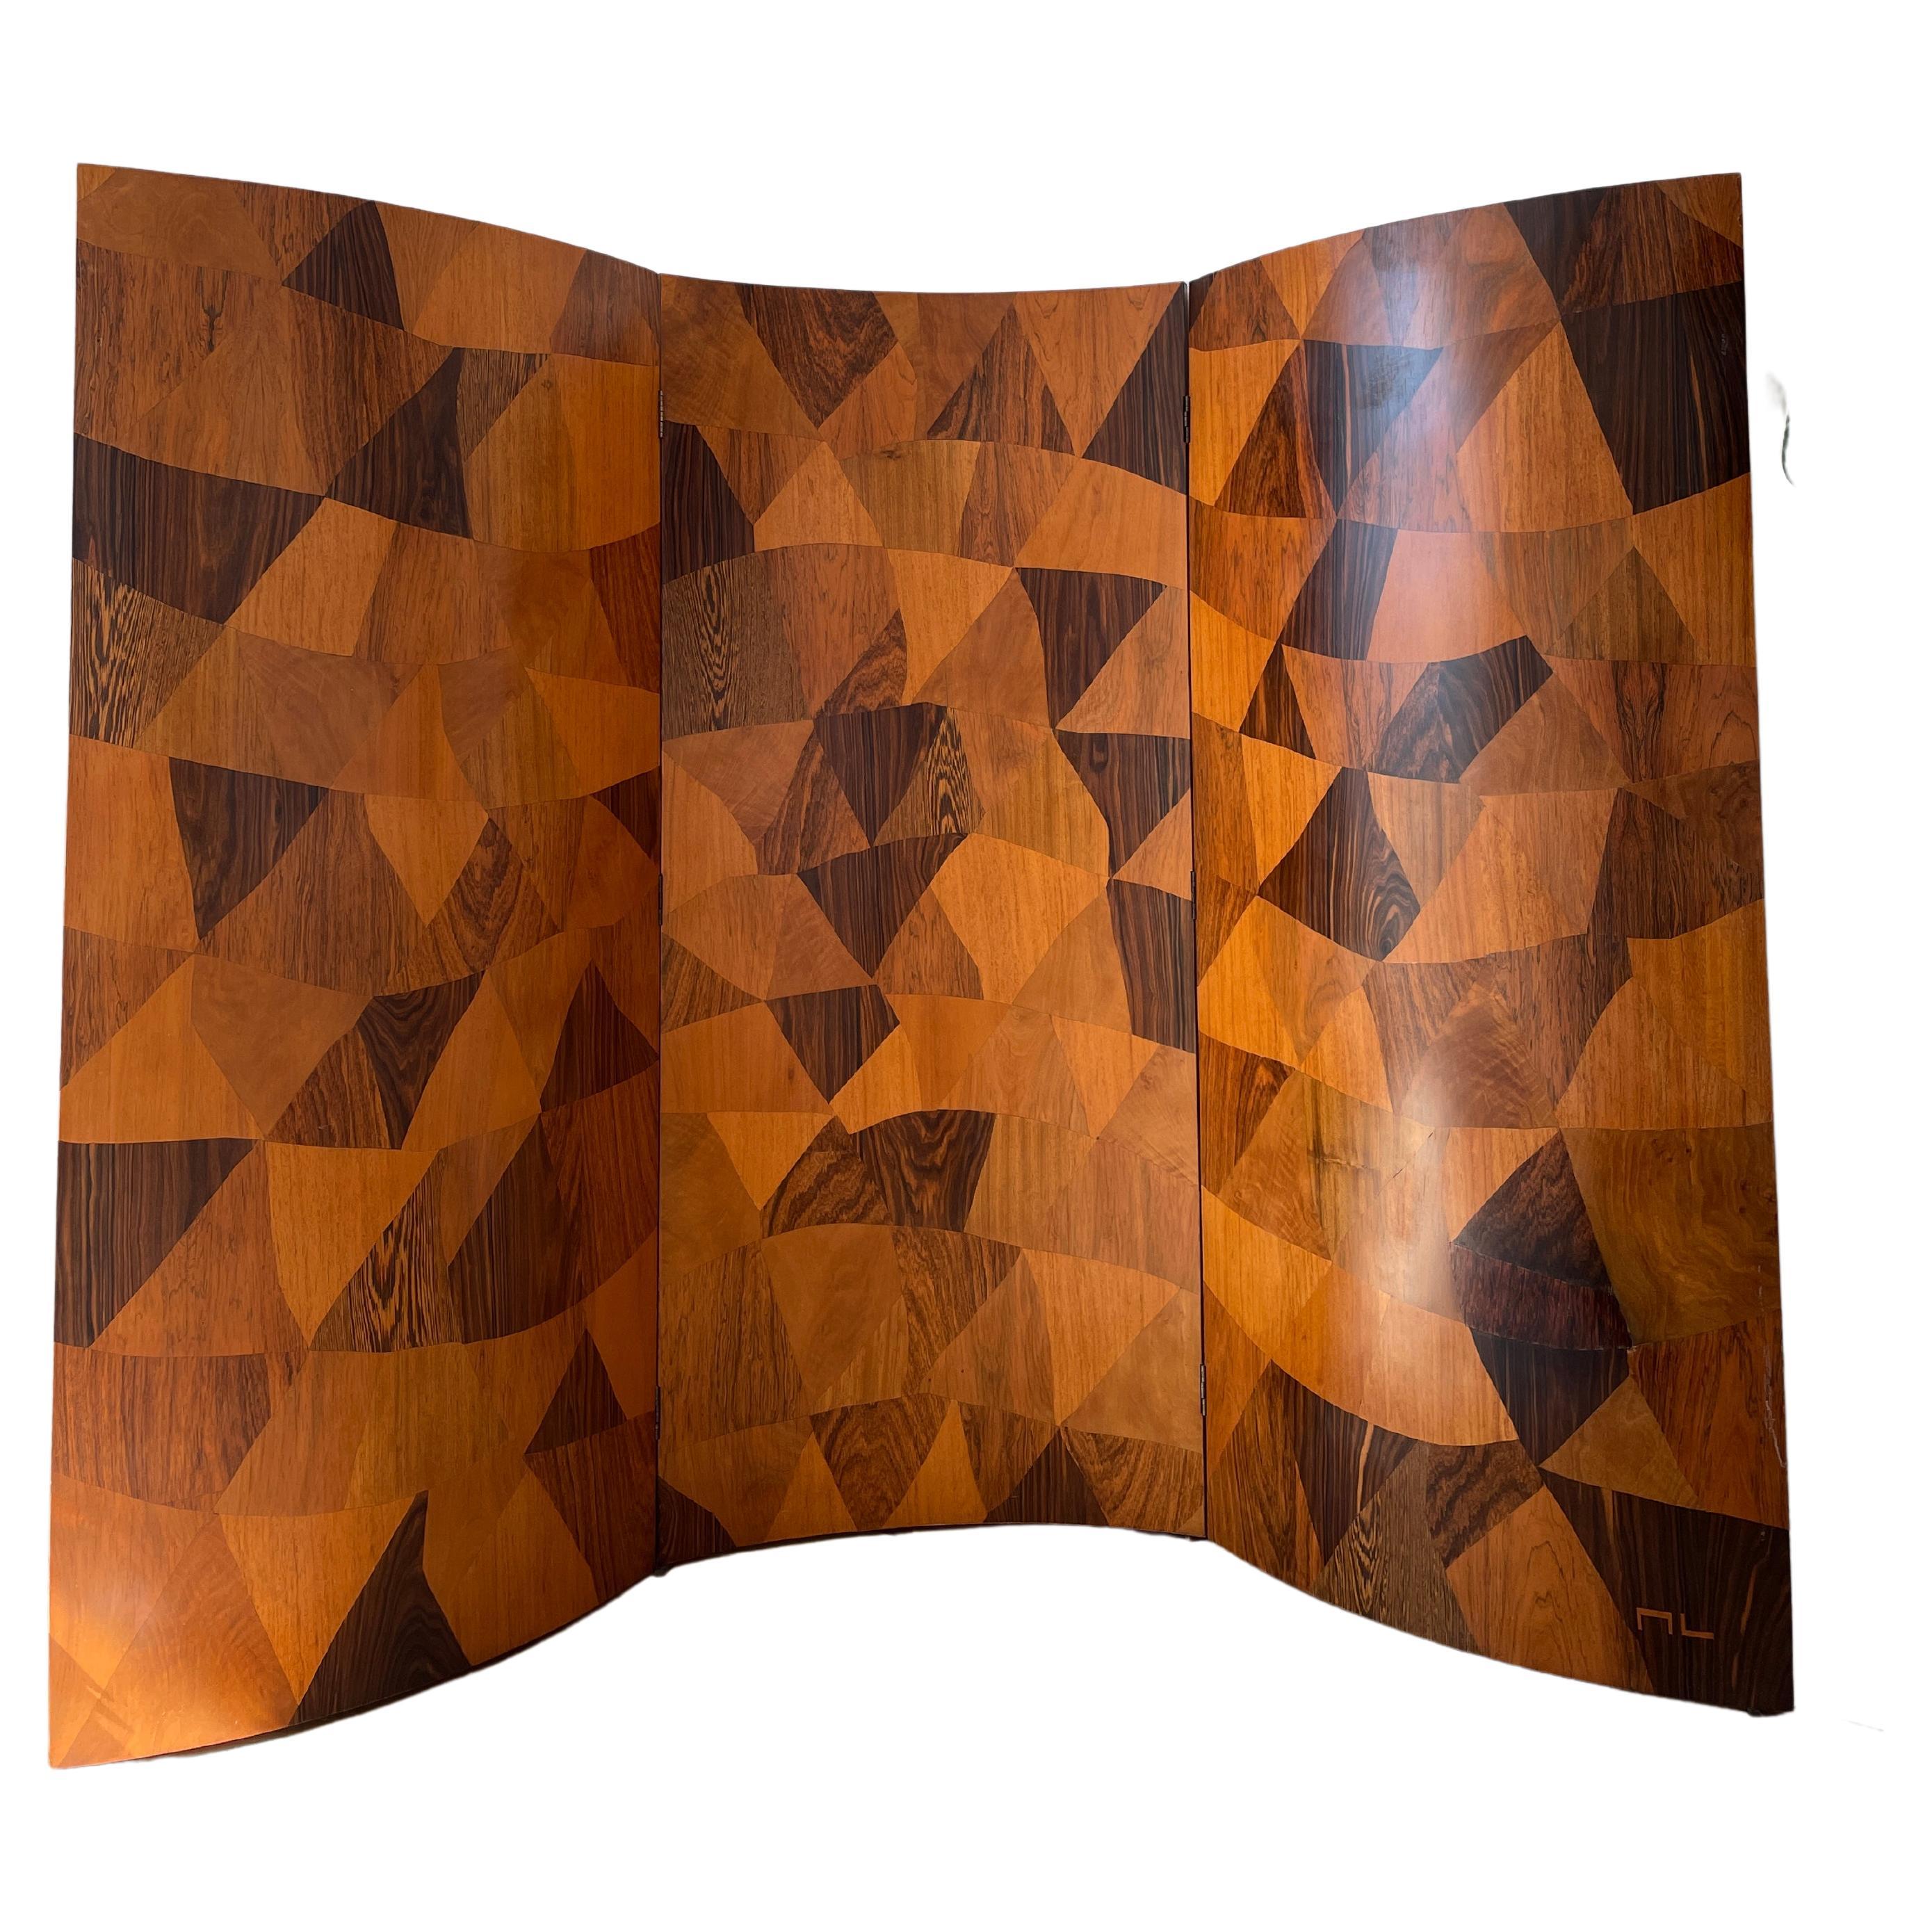 Height: 106cm
Width: 210cm

Designer: Michel Lefevre
Date: 1960s
Signed: Signed
Materials: Wood

Description: Made in the 1960s and newly restored by the artist himself. The Michel Lefevre Marquetry Screen is a stunning and intricately crafted piece